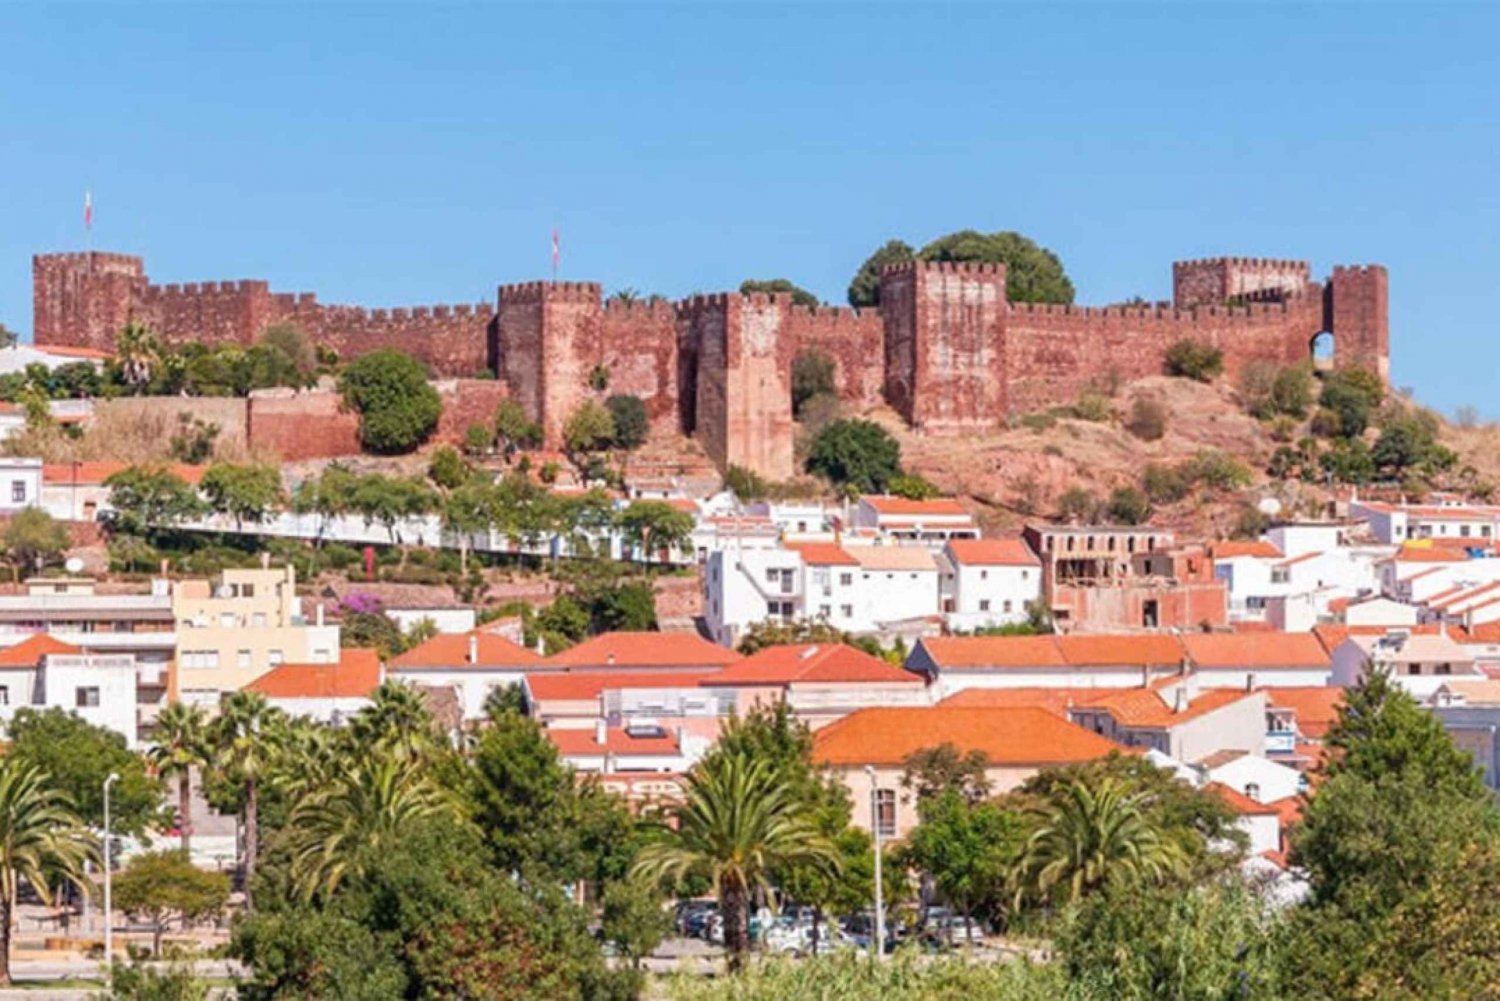 Benagil & Silves Castle Seightseing Tour from Albufeira